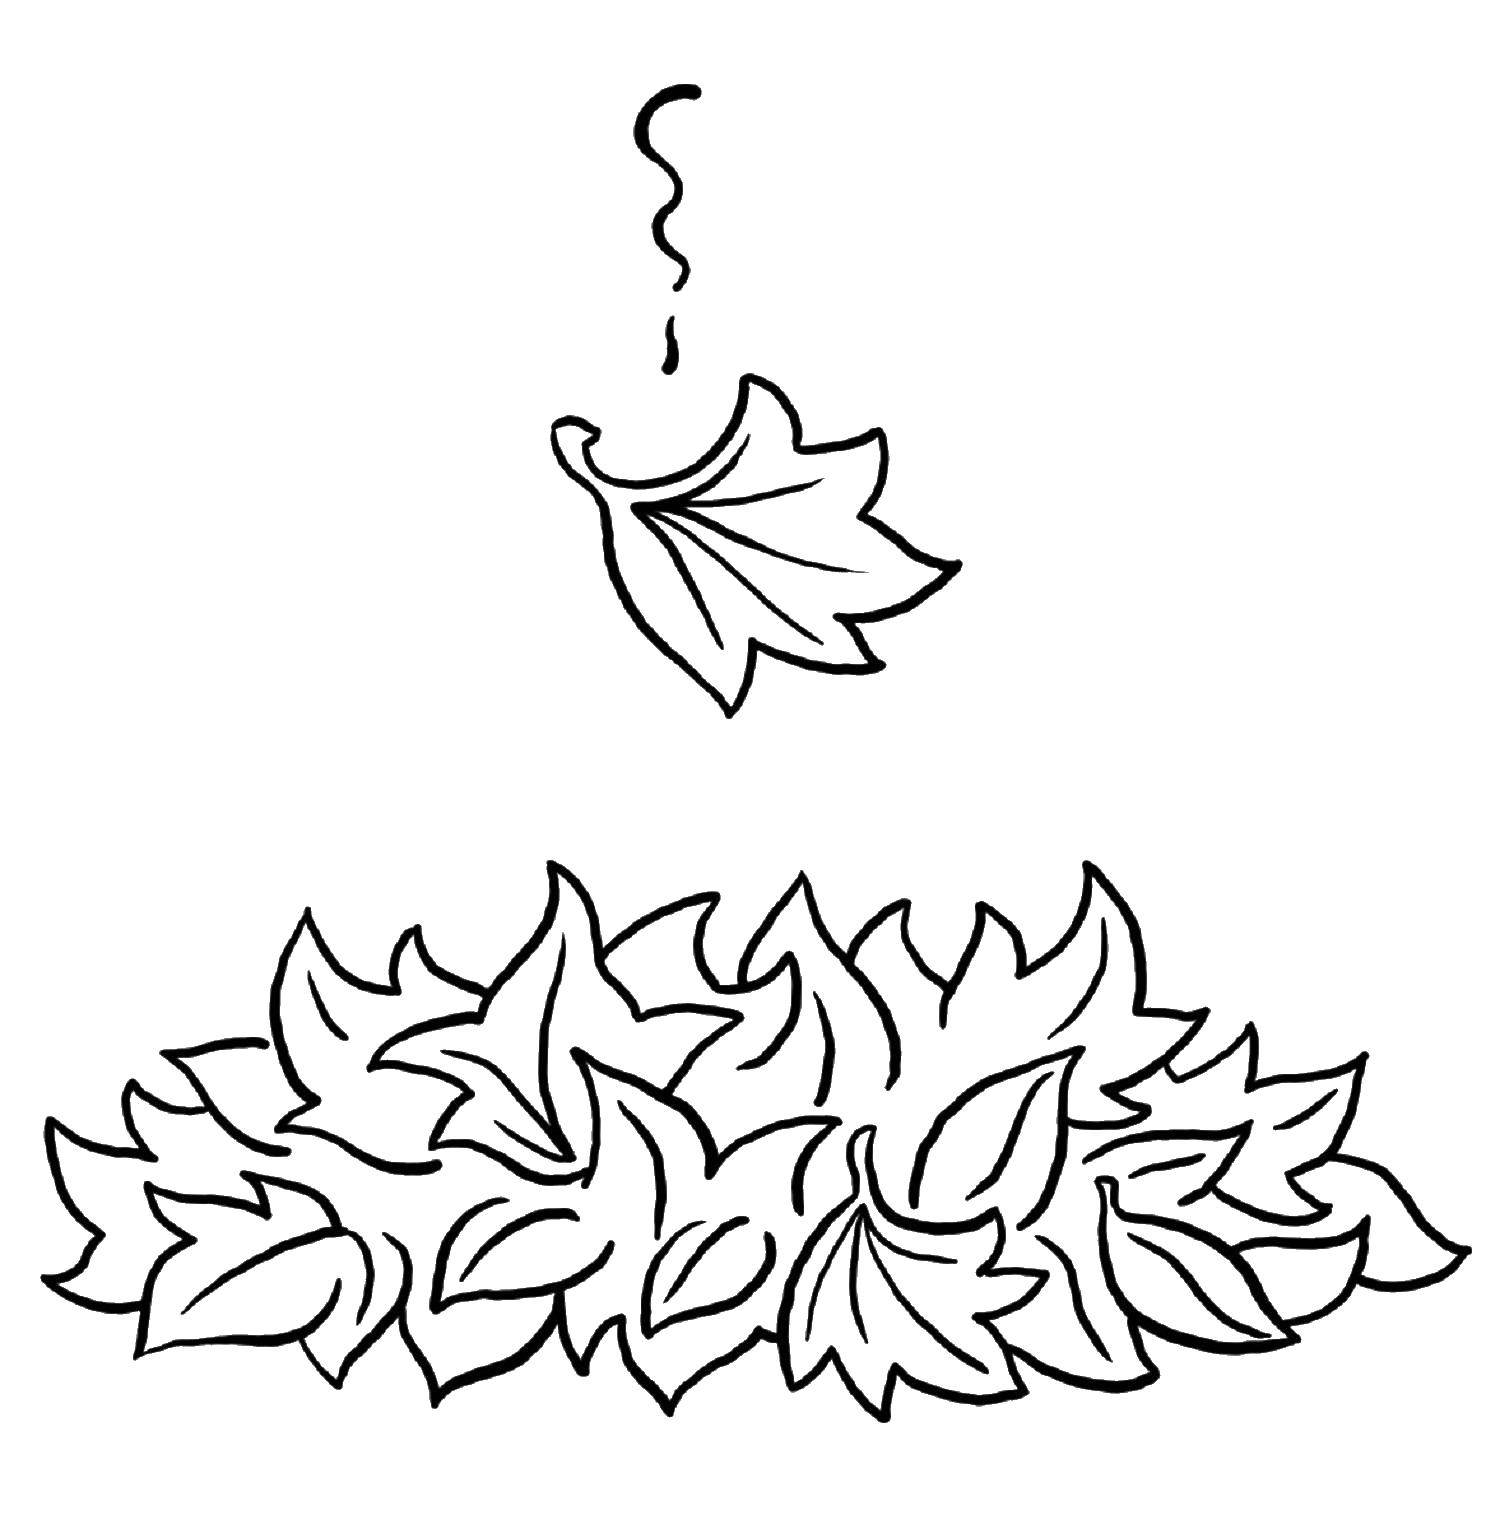 Coloring Leaves. Category Autumn leaves falling. Tags:  leaves.